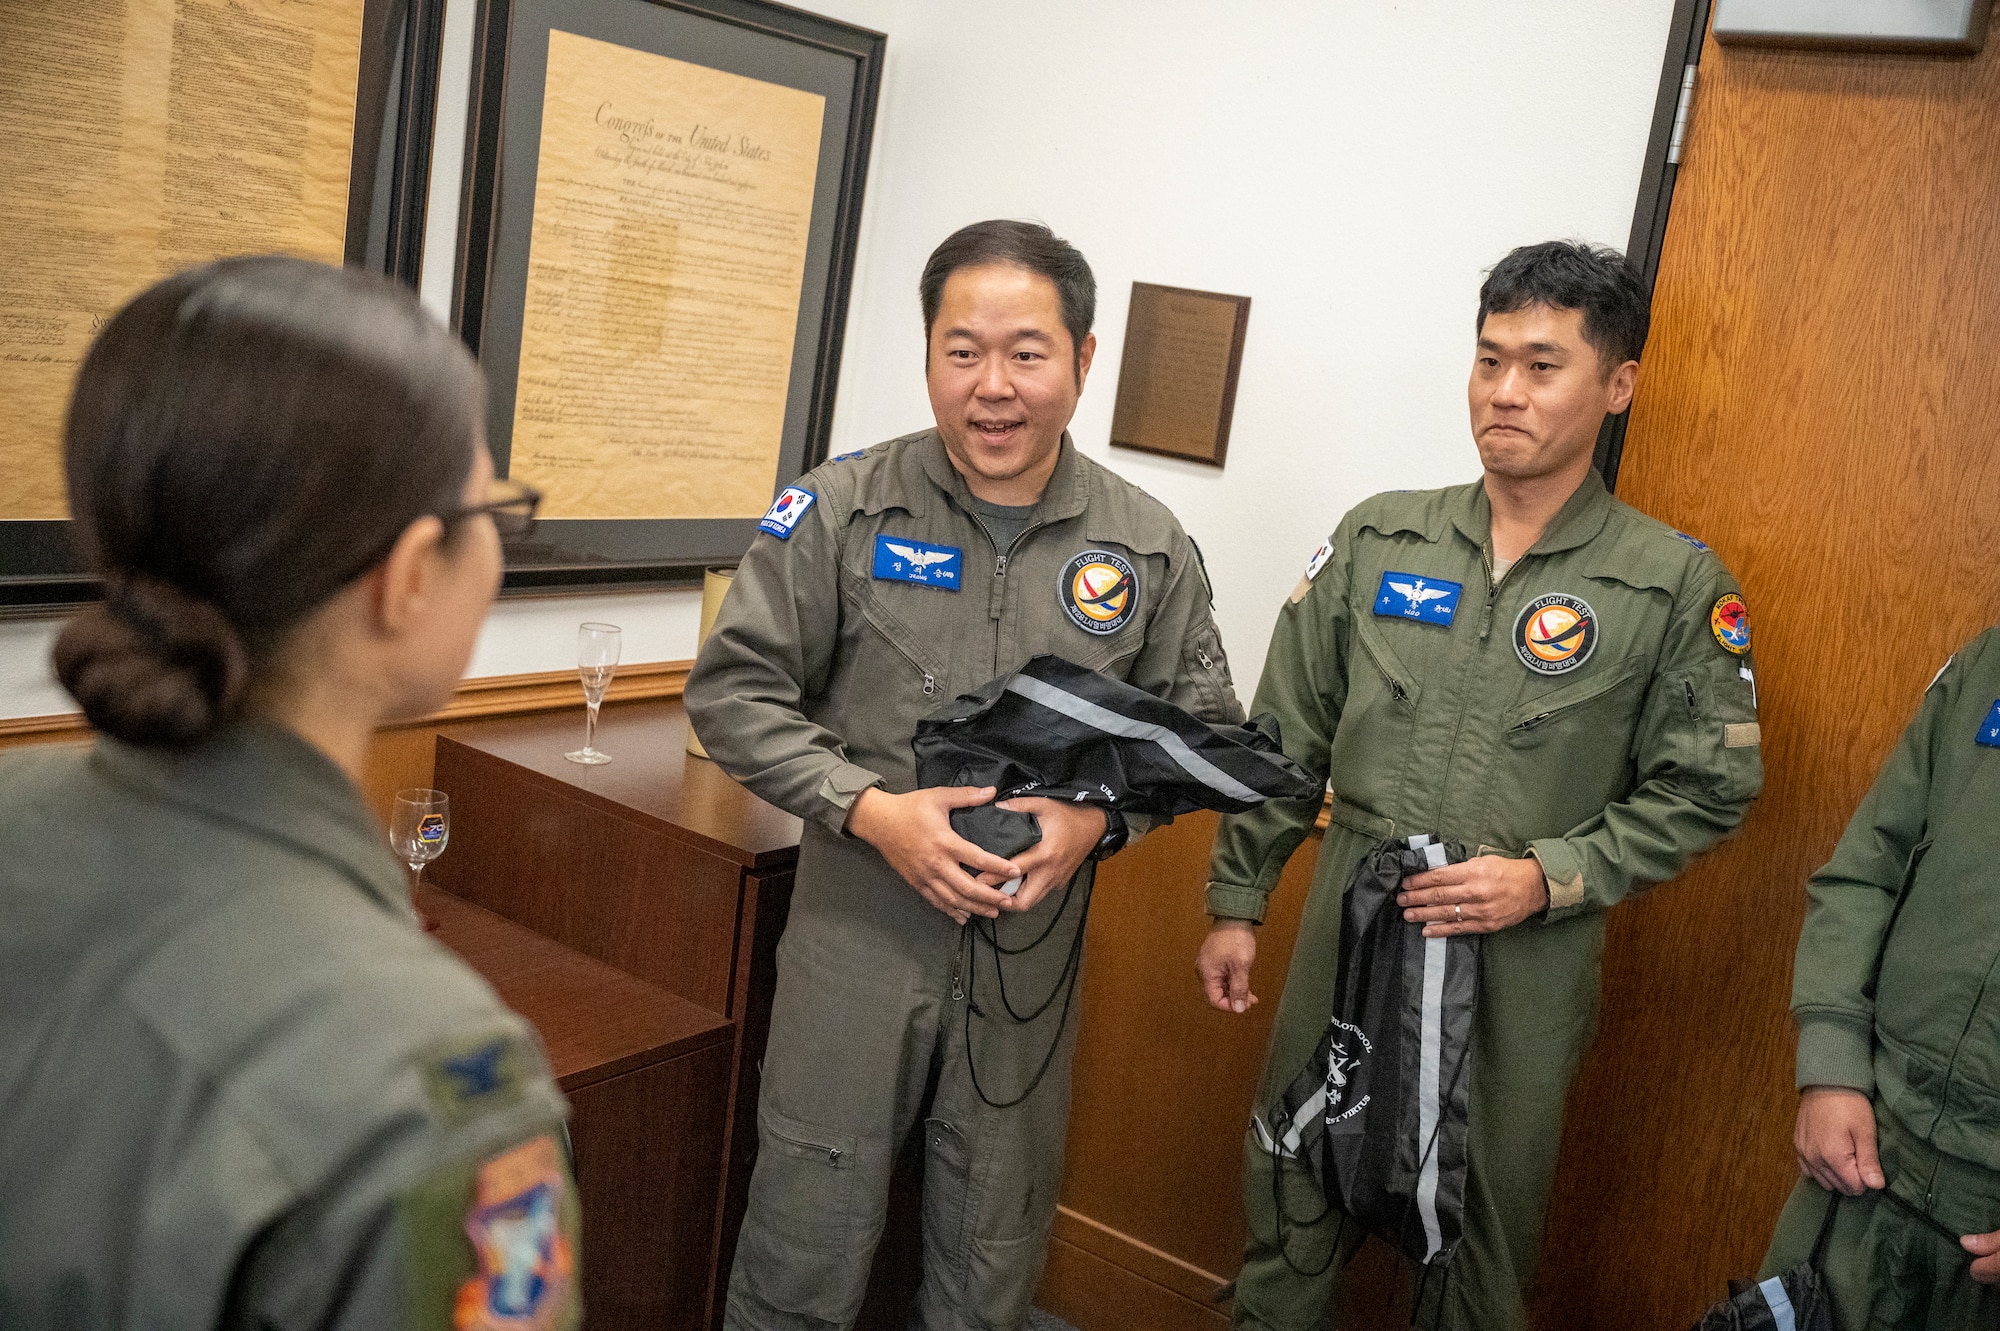 Col. Sebrina Pabon, Commandant, U.S. Air Force Test Pilot School presents a parting gift to the Republic of Korean Air Force (ROKAF) team after a successful technical exchange.